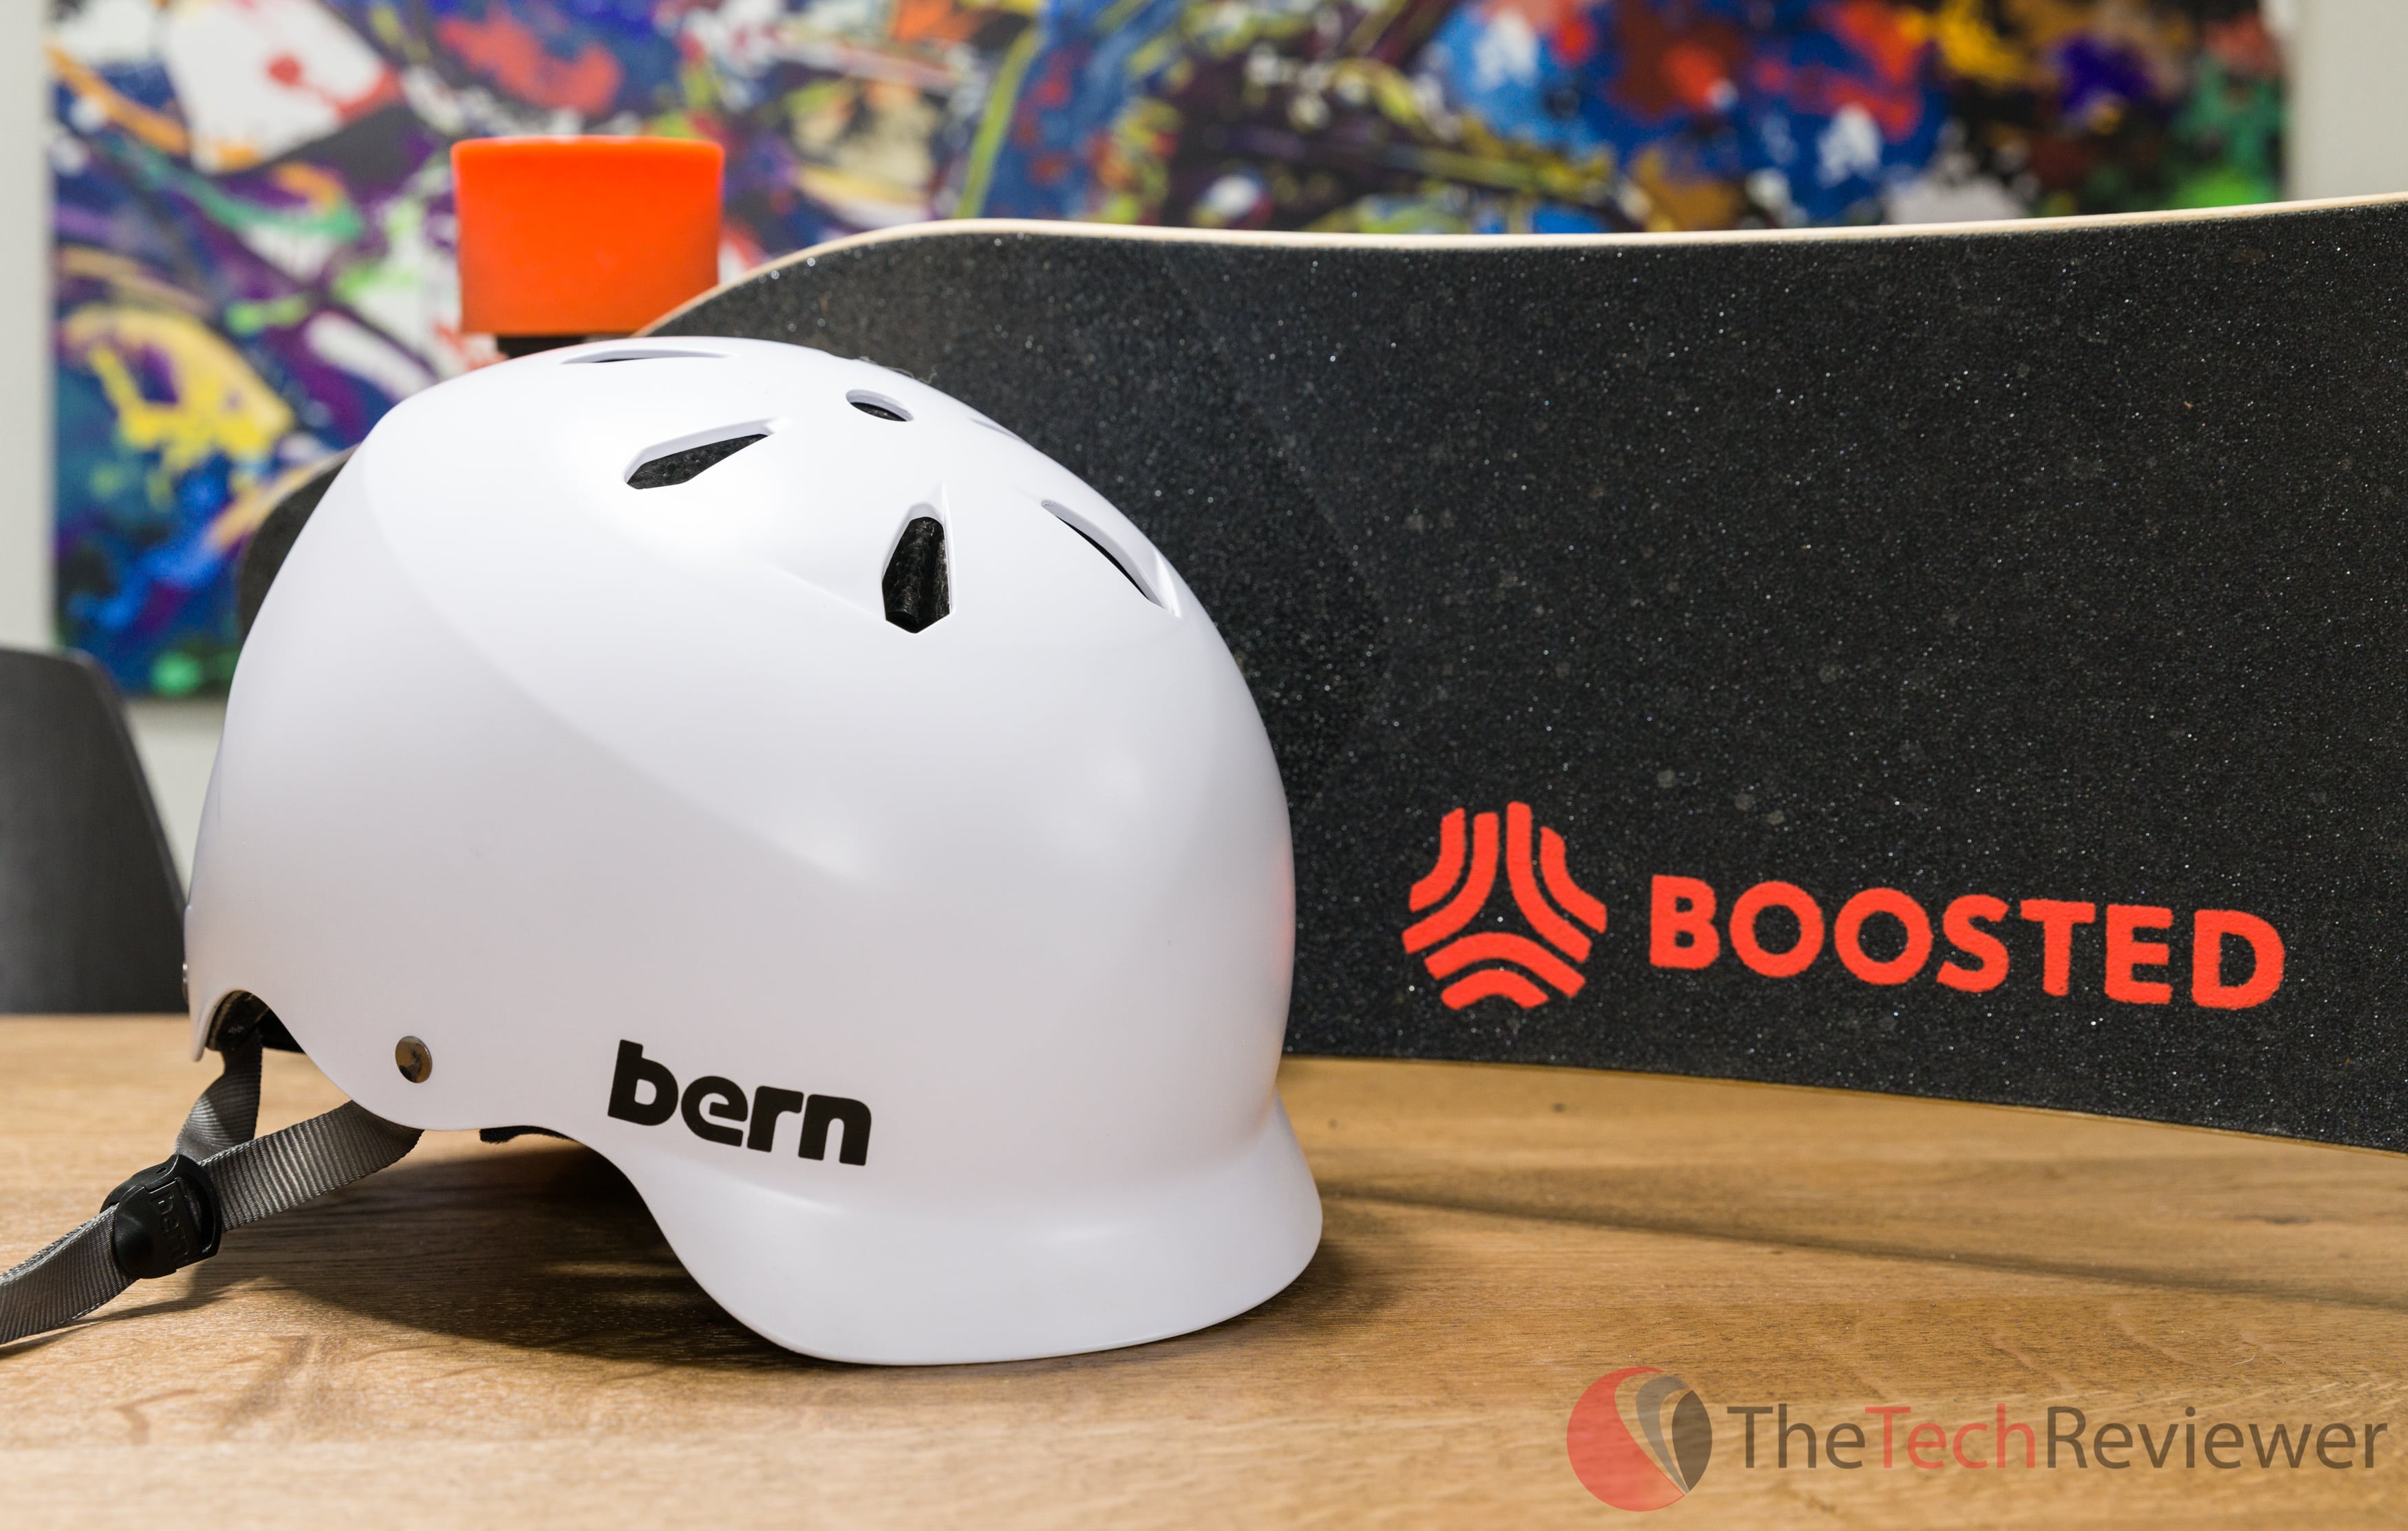 7 Of The Best Helmets For The Boosted Board & Electric Skateboards